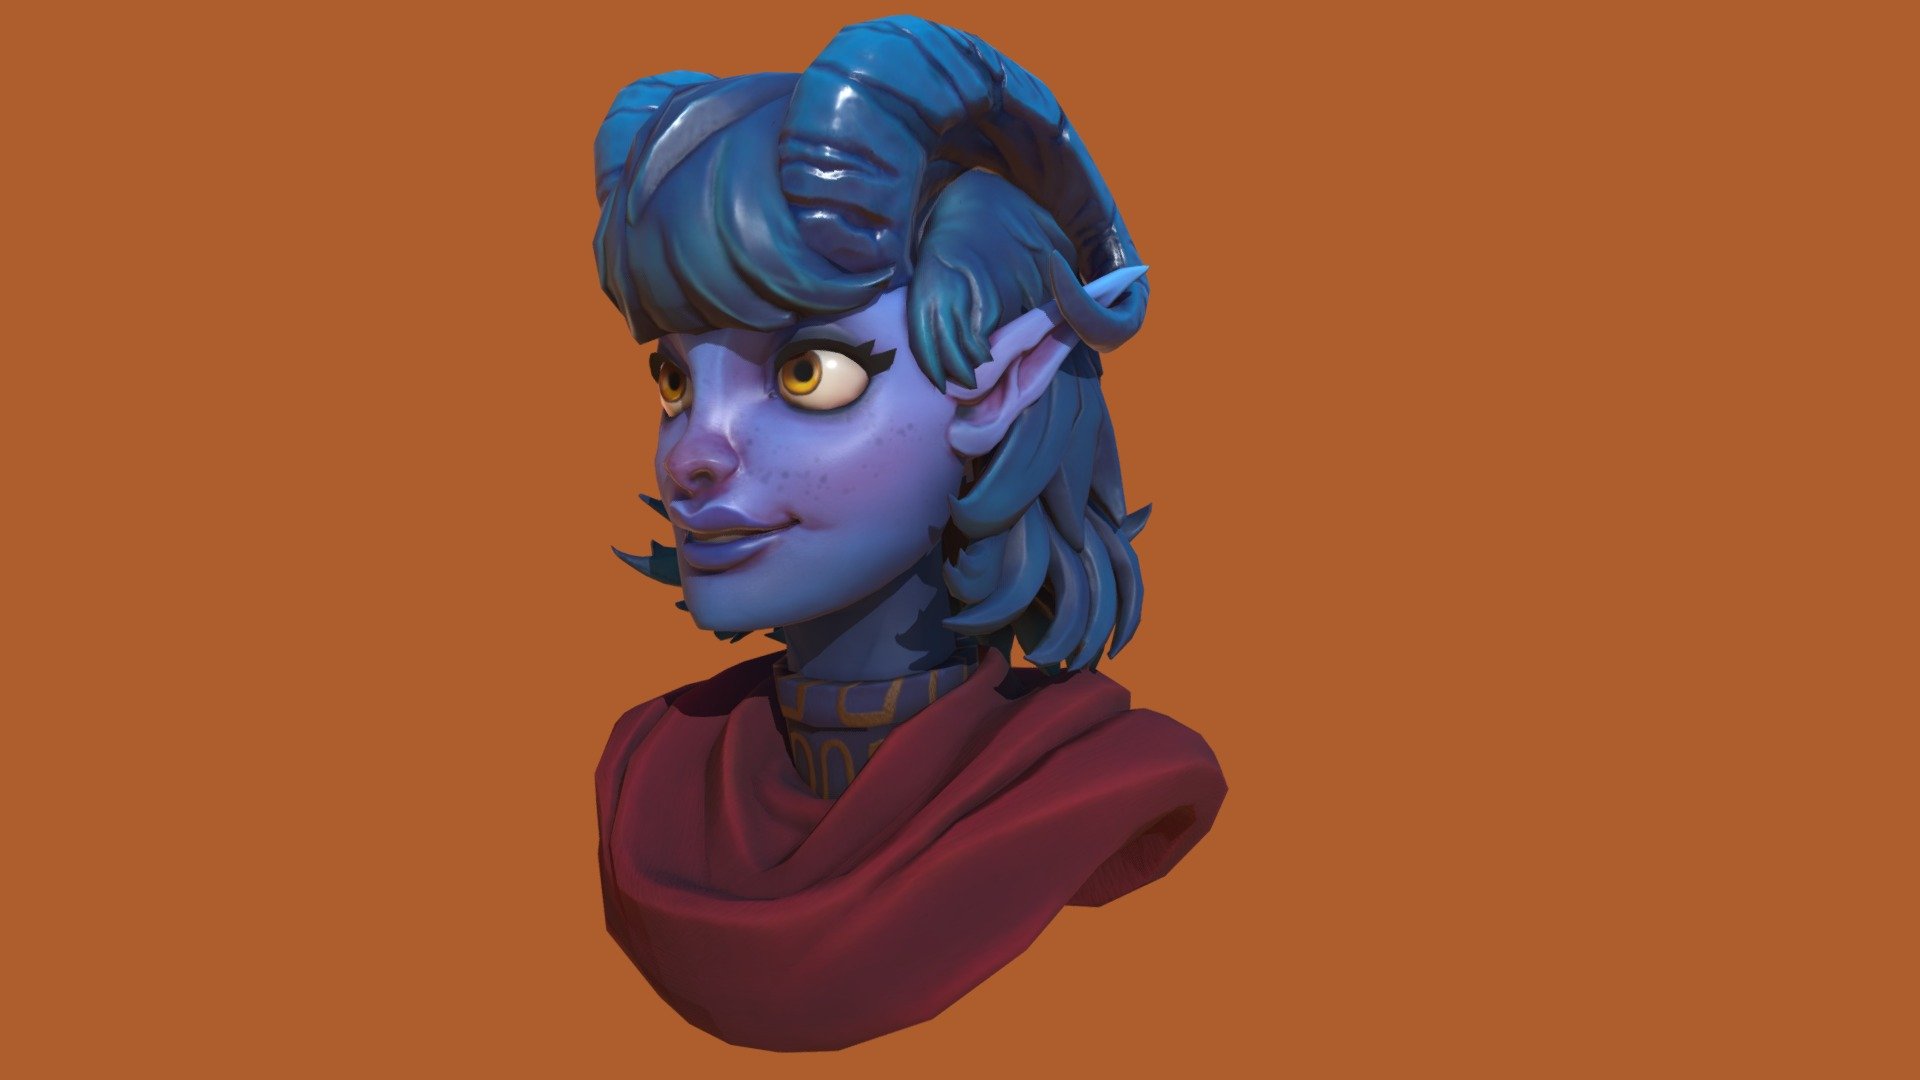 Another Critical Role fanart! This time it's Carlos Ruiz's awesome interpretation of Laura Bailey as Jester the tiefling cleric (with his blessing!).
I scaled down this project so that I could focus on my sculpting and texturing skills (specifically faces/hair) and even though I failed to follow Carlos' shapes, I'm very happy with the final outcome.
Game res, as usual!
The original concept can be seen here https://www.artstation.com/artwork/22mWa - Jester bust (Critical Role fanart) - 3D model by joustai (@alvarias) 3d model